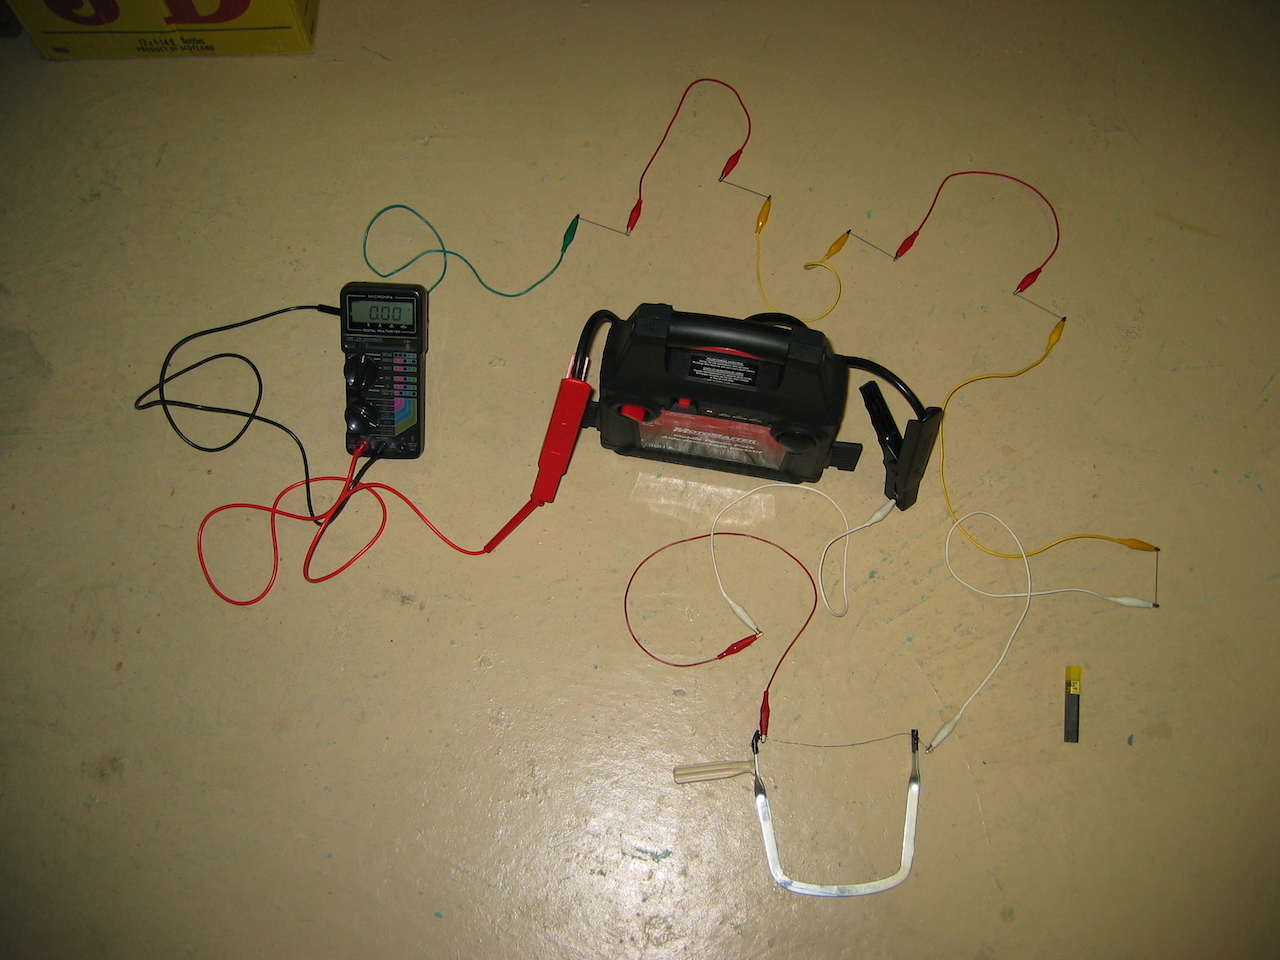 A series circuit of a 12 volt battery pack, 5 pencil leads, a multimeter, and a length of nichrome wire mounted in a small hacksaw where the saw blade should be. The elements of the circuit are connected with variously-coloured alligator clips.